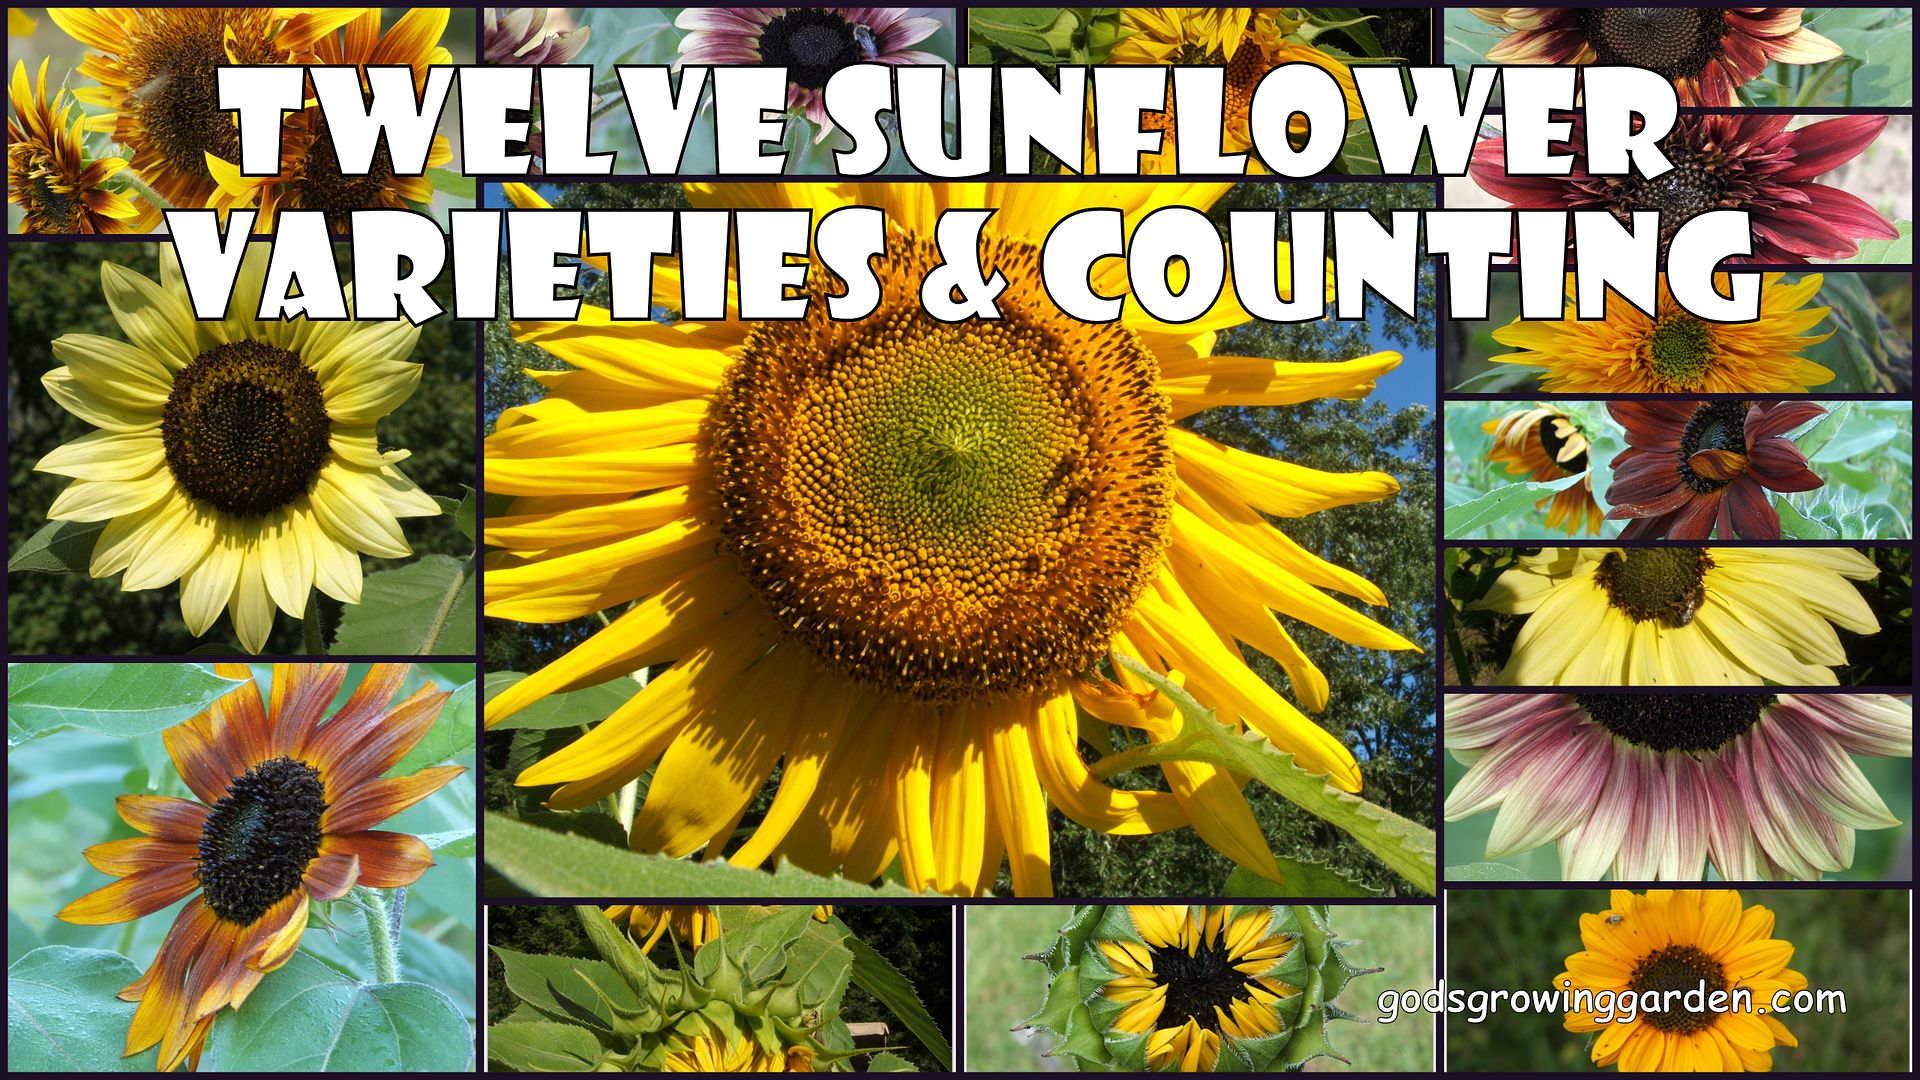 12 Sunflowers by Angie Ouellette-Tower for godsgrowinggarden.com photo 2012-09-06_zps5a51cf4c.jpg